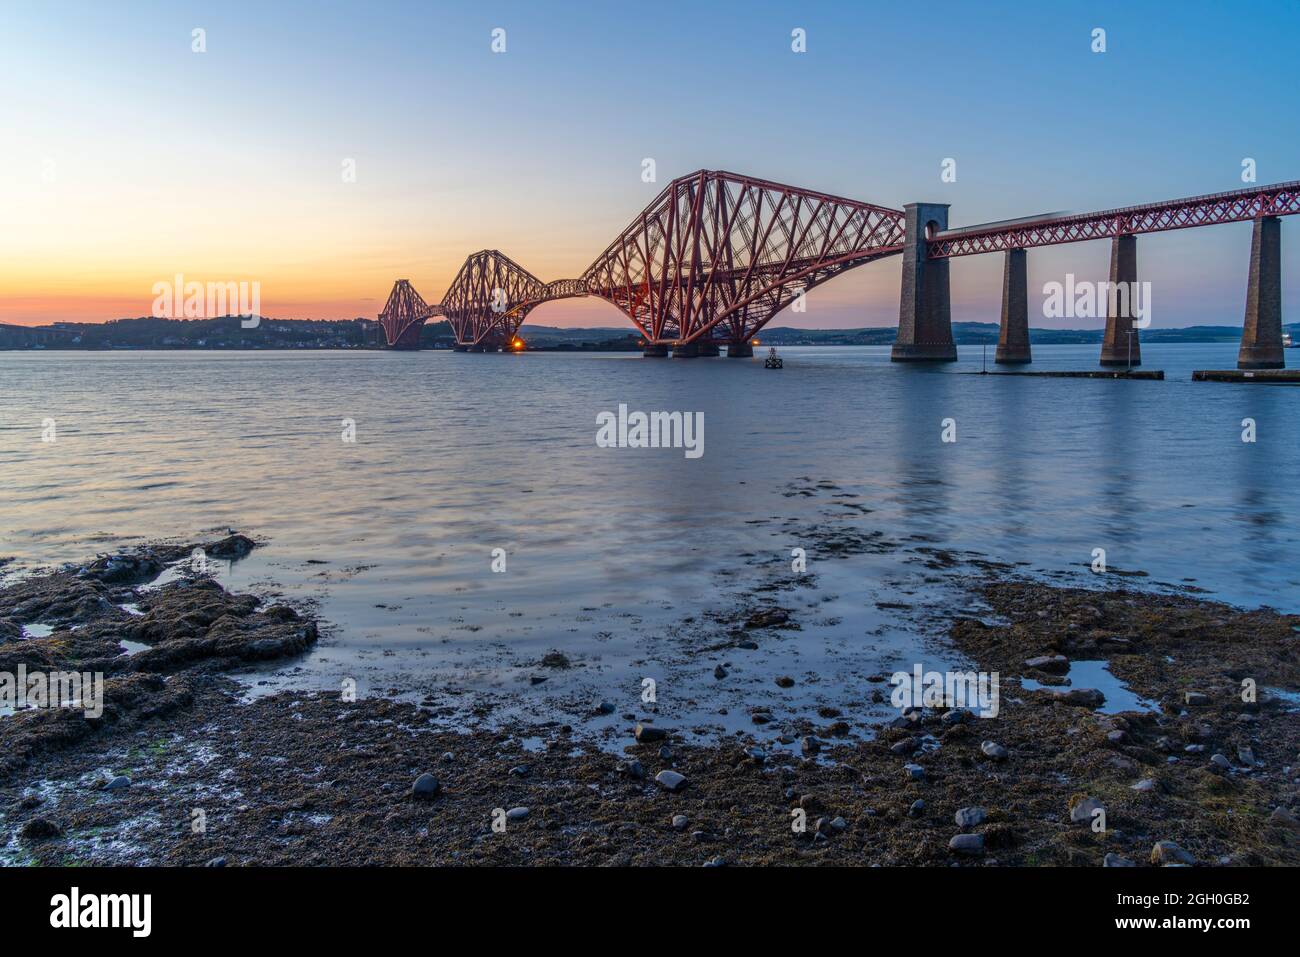 View of the Forth Rail Bridge over the Firth of Forth at dusk, South Queensferry, Edinburgh, Lothian, Scotland, United Kingdom, Europe Stock Photo